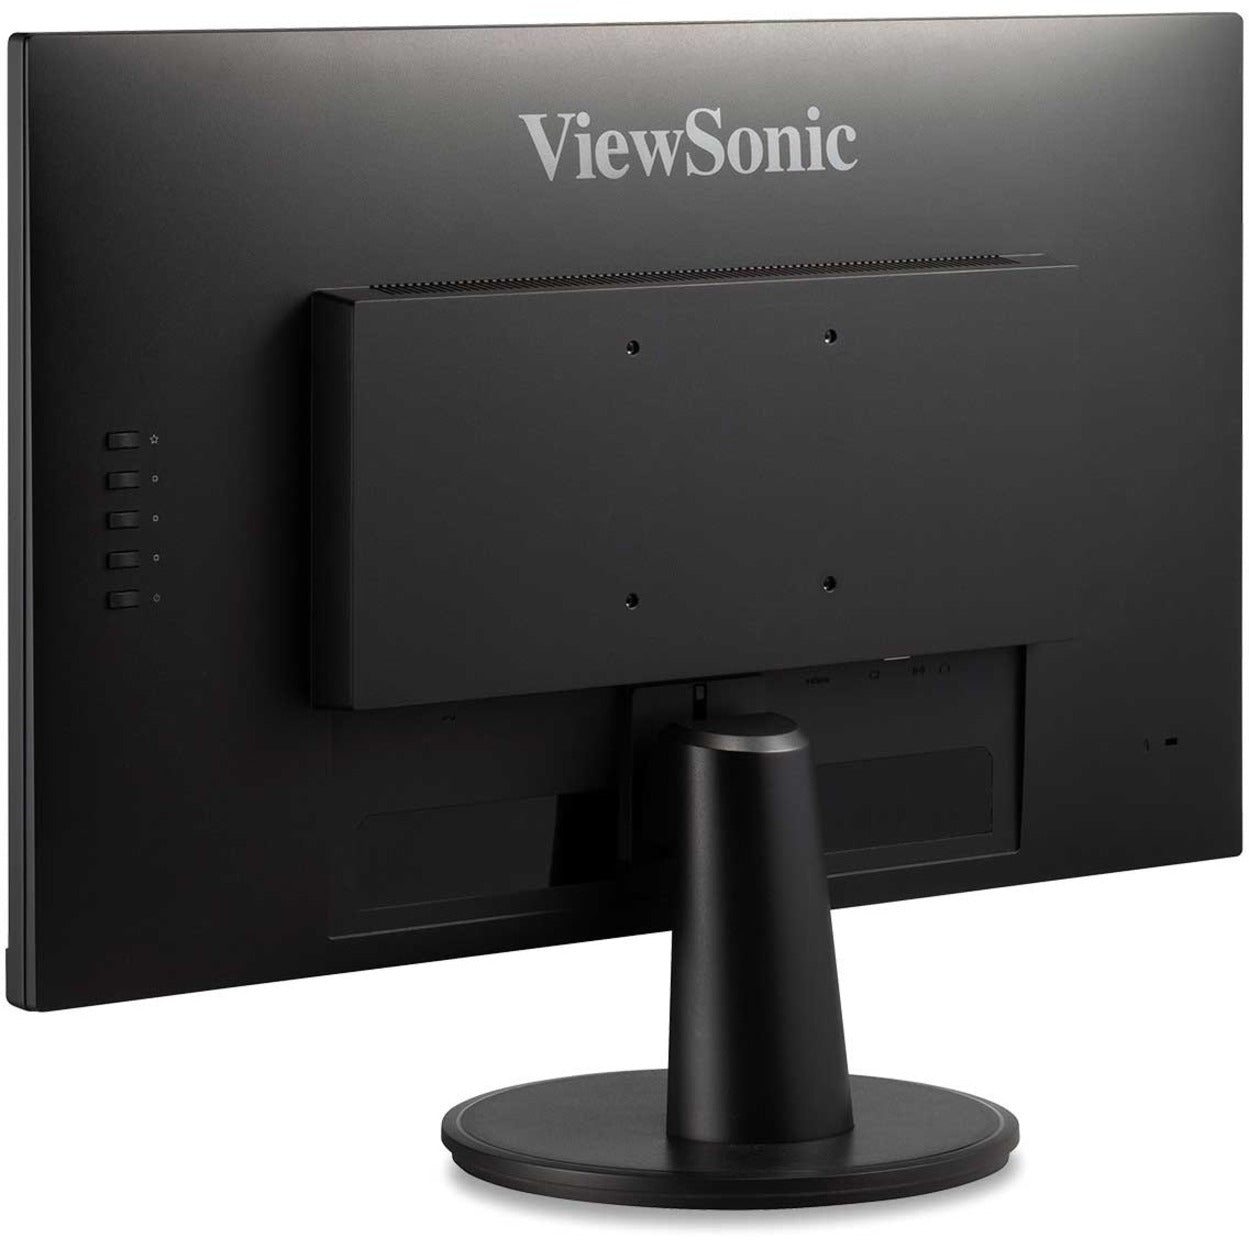 ViewSonic VA2747-MH 27 Inch Full HD 1080p Monitor with Ultra-Thin Bezel AMD FreeSync 75Hz Eye Care and HDMI VGA Inputs for Home and Office